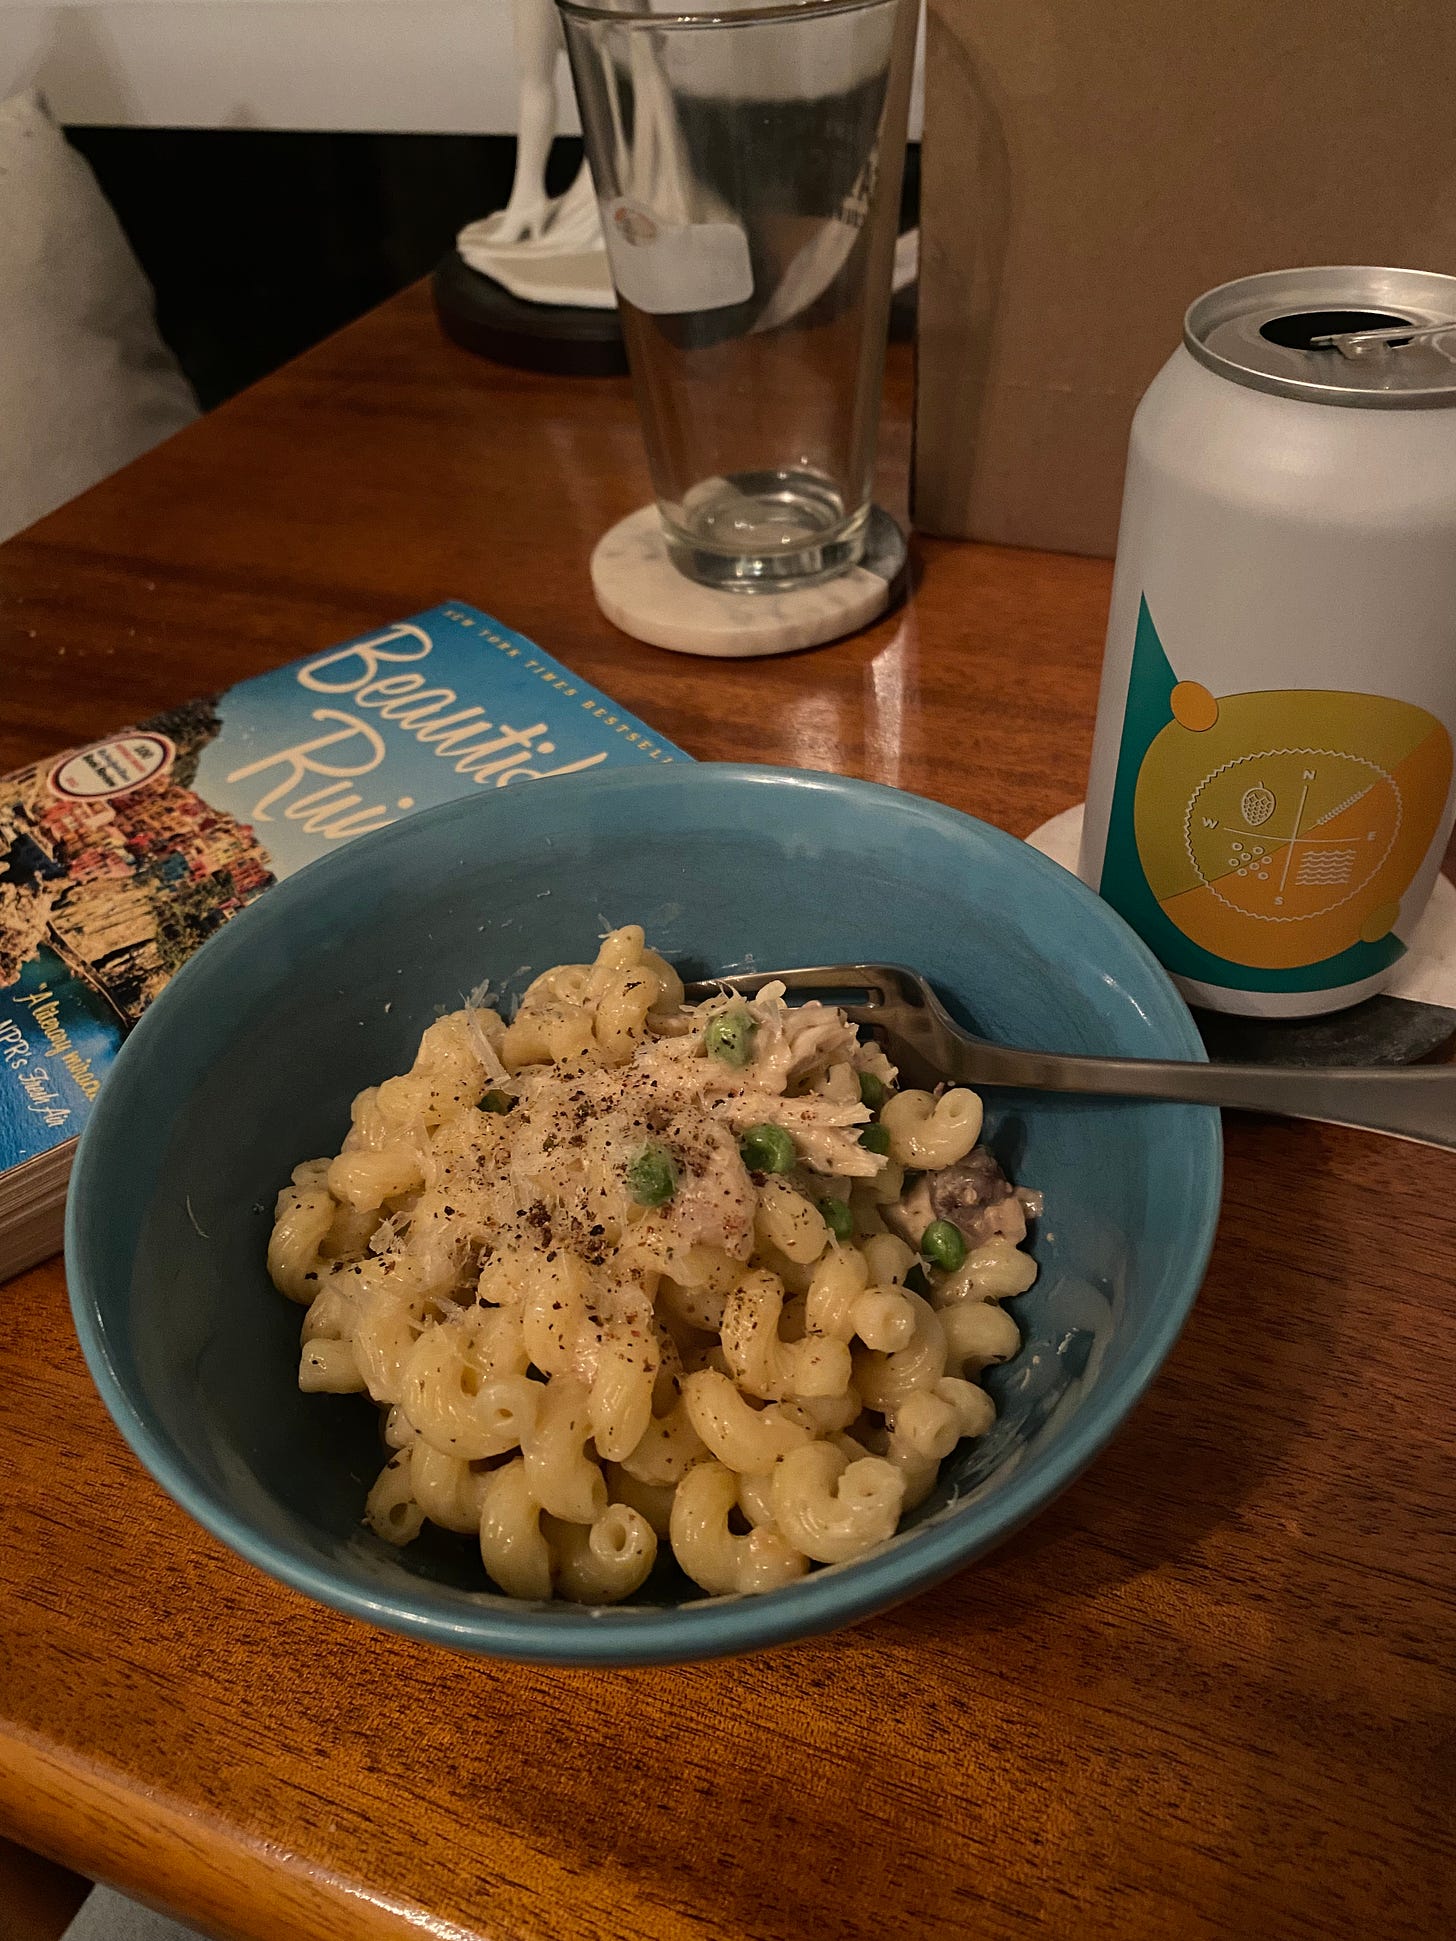 A blue bowl of short noodles in a creamy sauce with pieces of shredded chicken, green peas, and lots of black pepper. Behind it is a paperback novel, "Beautiful Ruins", and to its right on a coaster is a can of Four Winds beer.